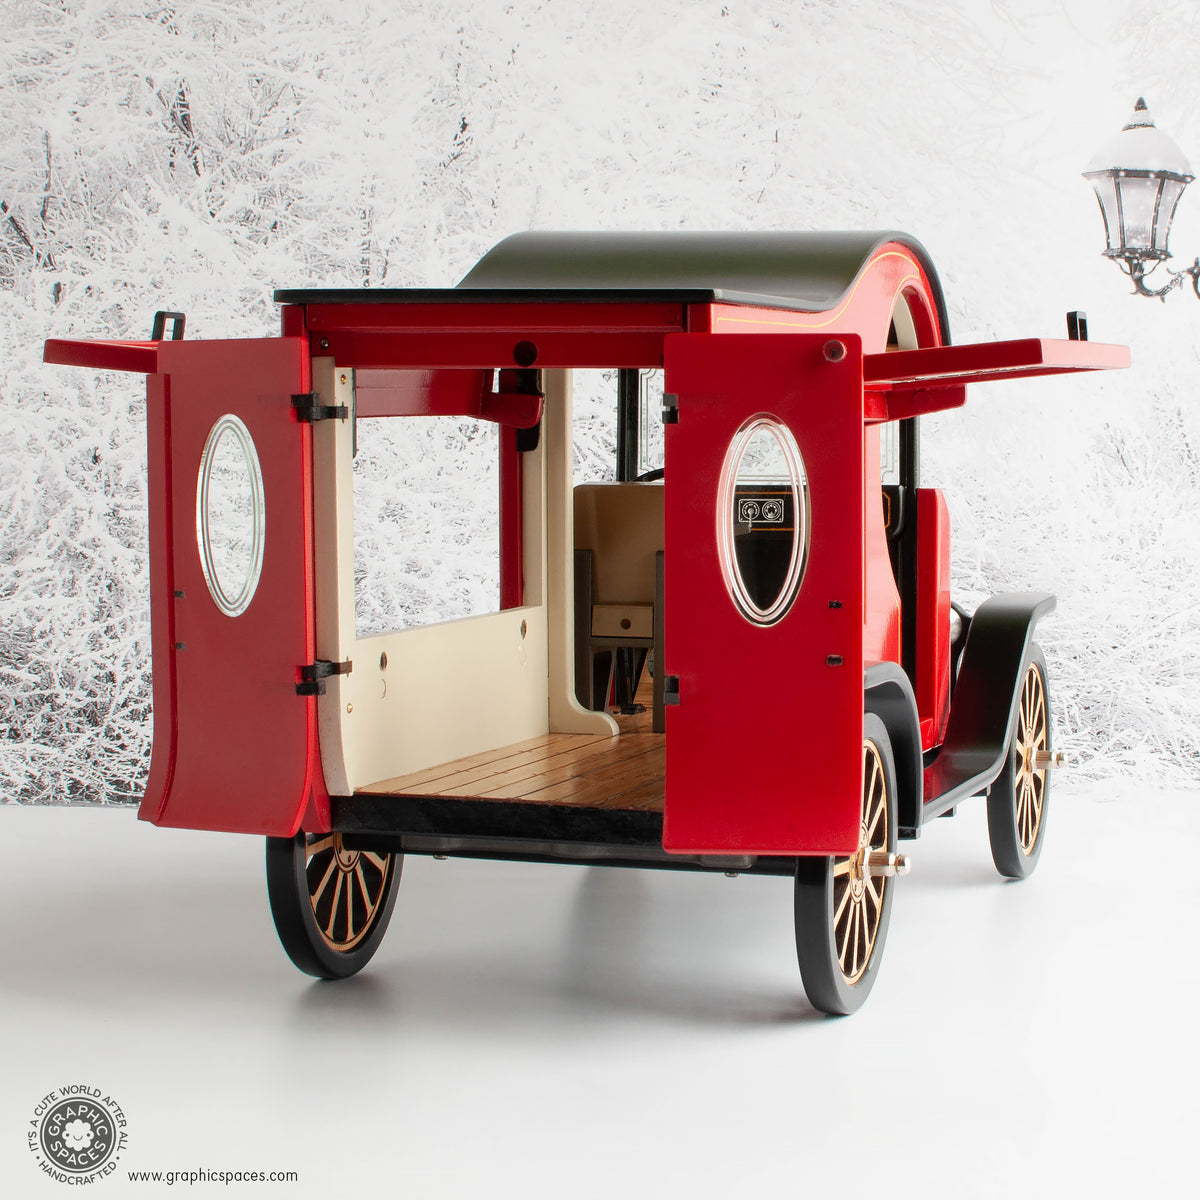 1:12 Scale Room Box Red Christmas Market Truck Model T C Cab. Open door rear view. No Counter or Shelves. Windows open.